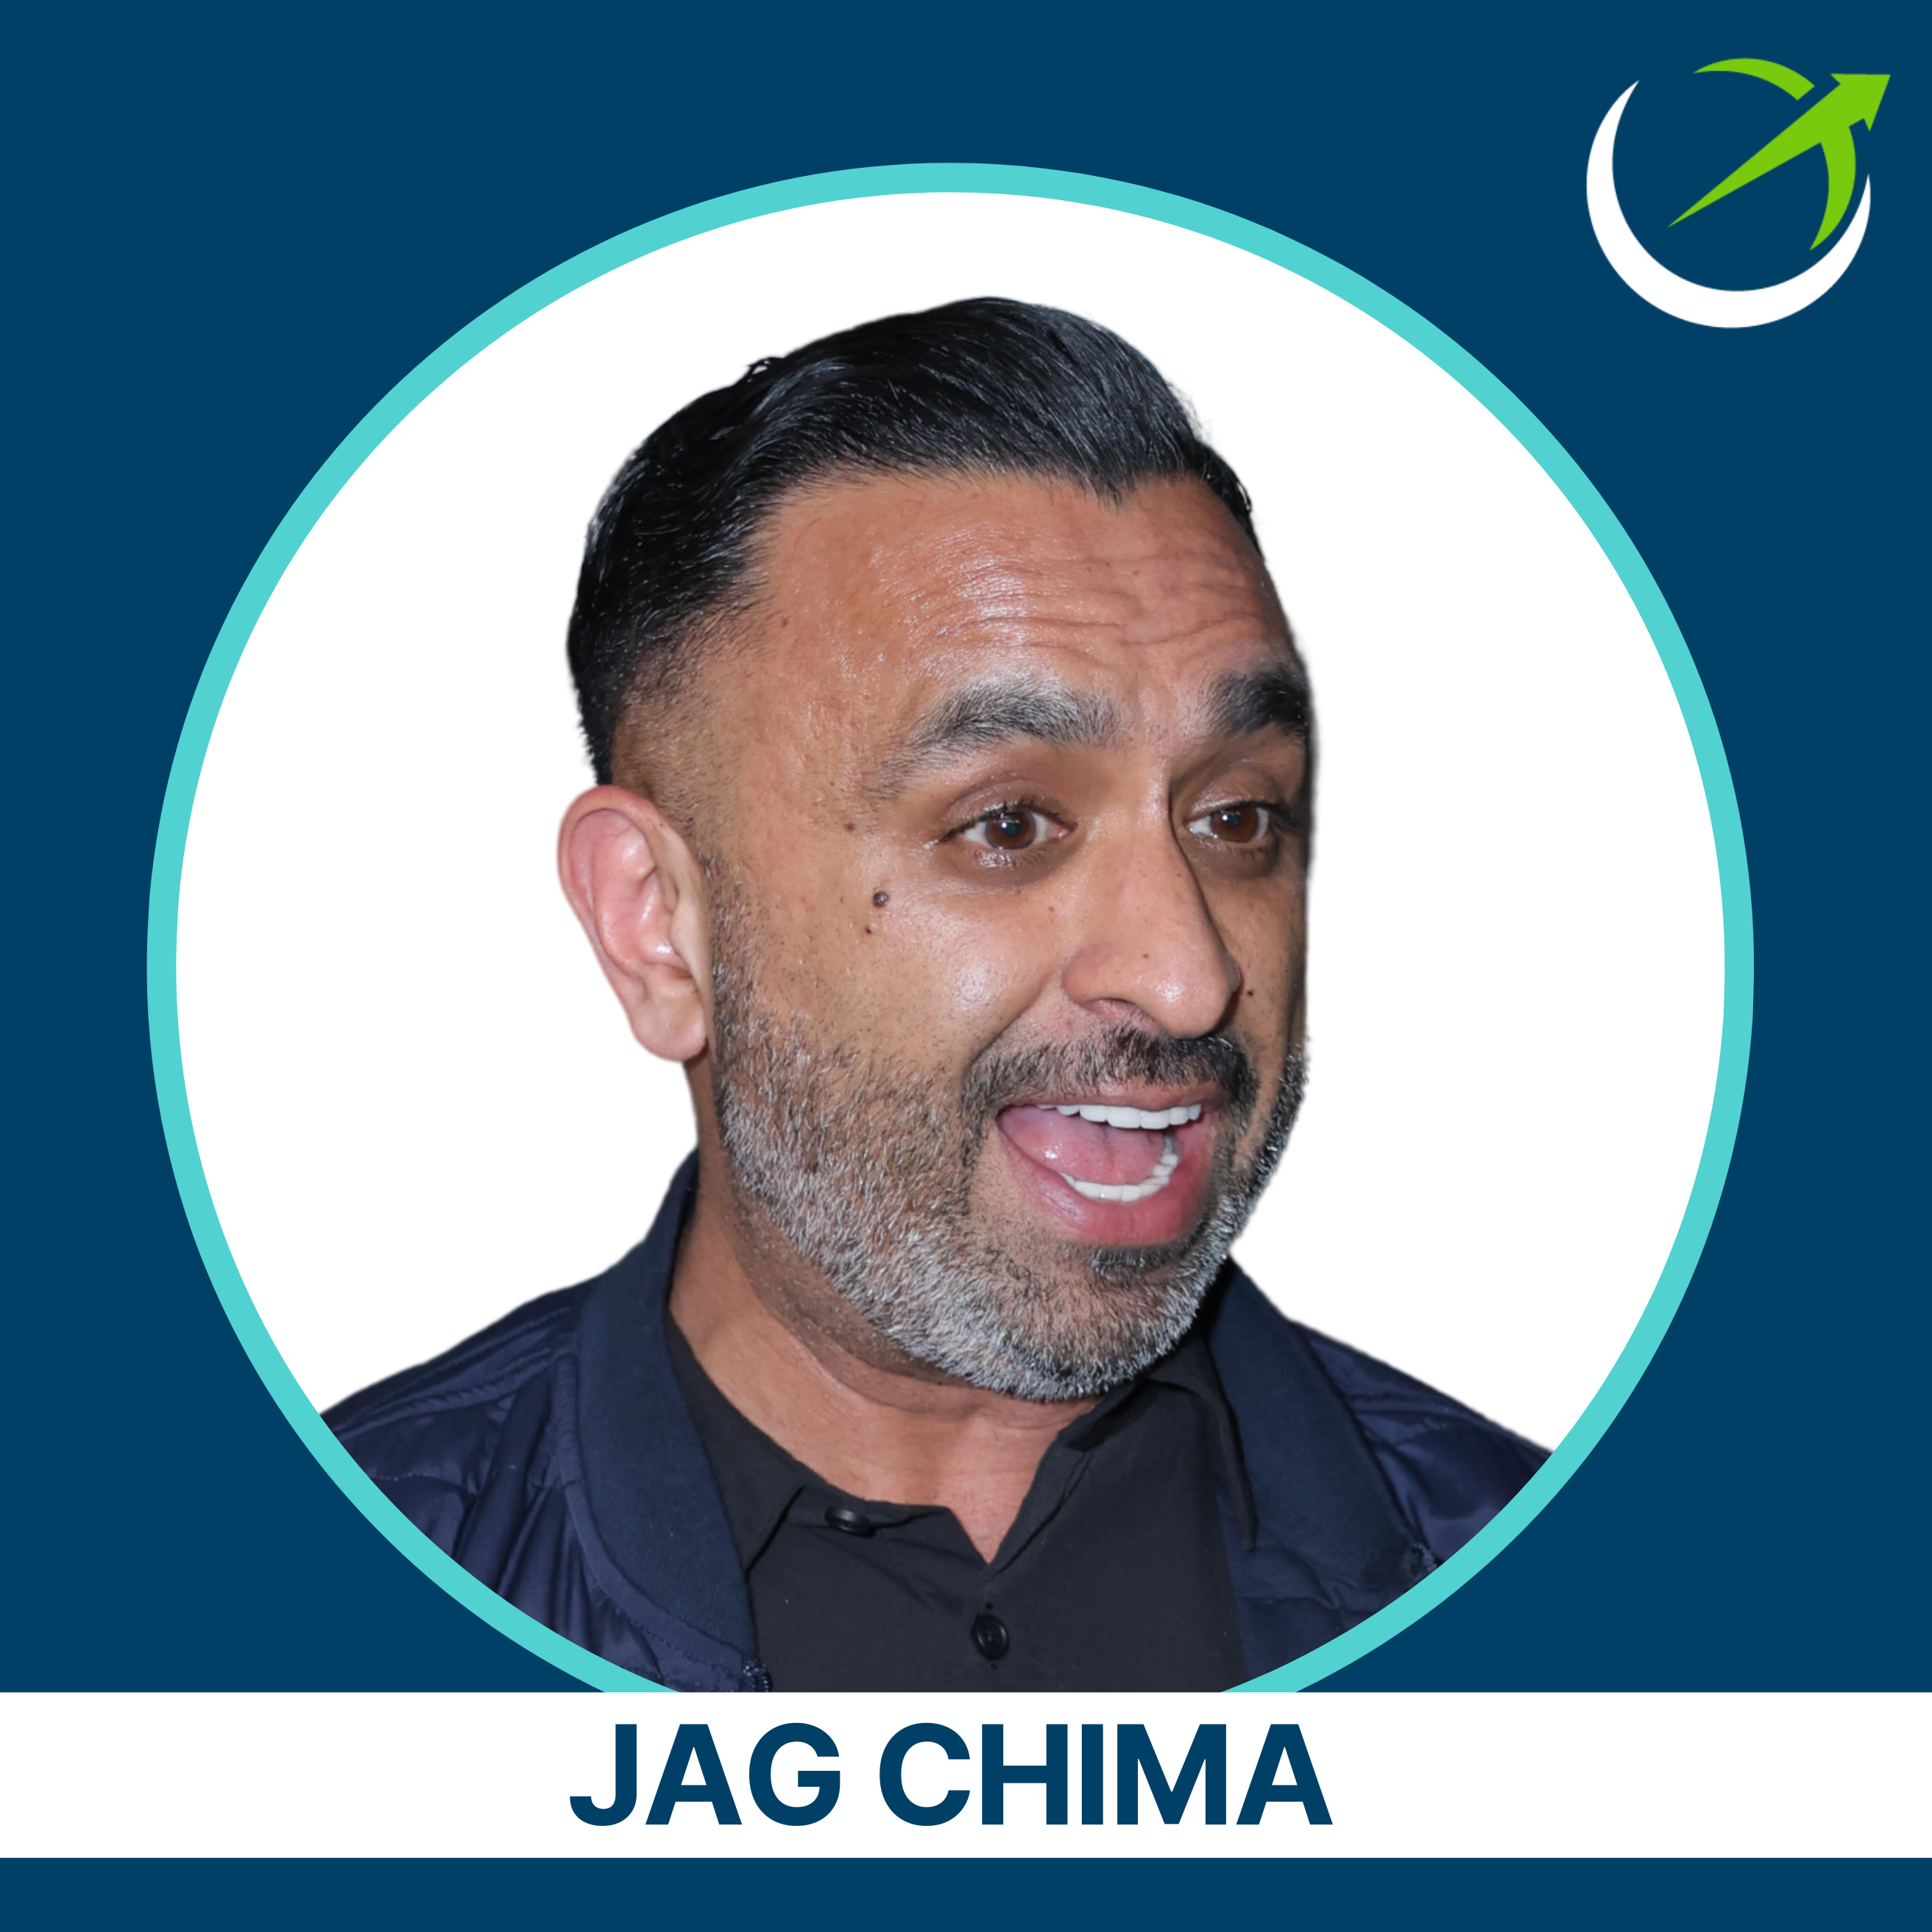 How to Biohack International Travel, Ben's Inexpensive Hair Loss Prevention Protocol, Top Ancestral Living Strategies For A Longer Lifespan, & More With Jag Chima.